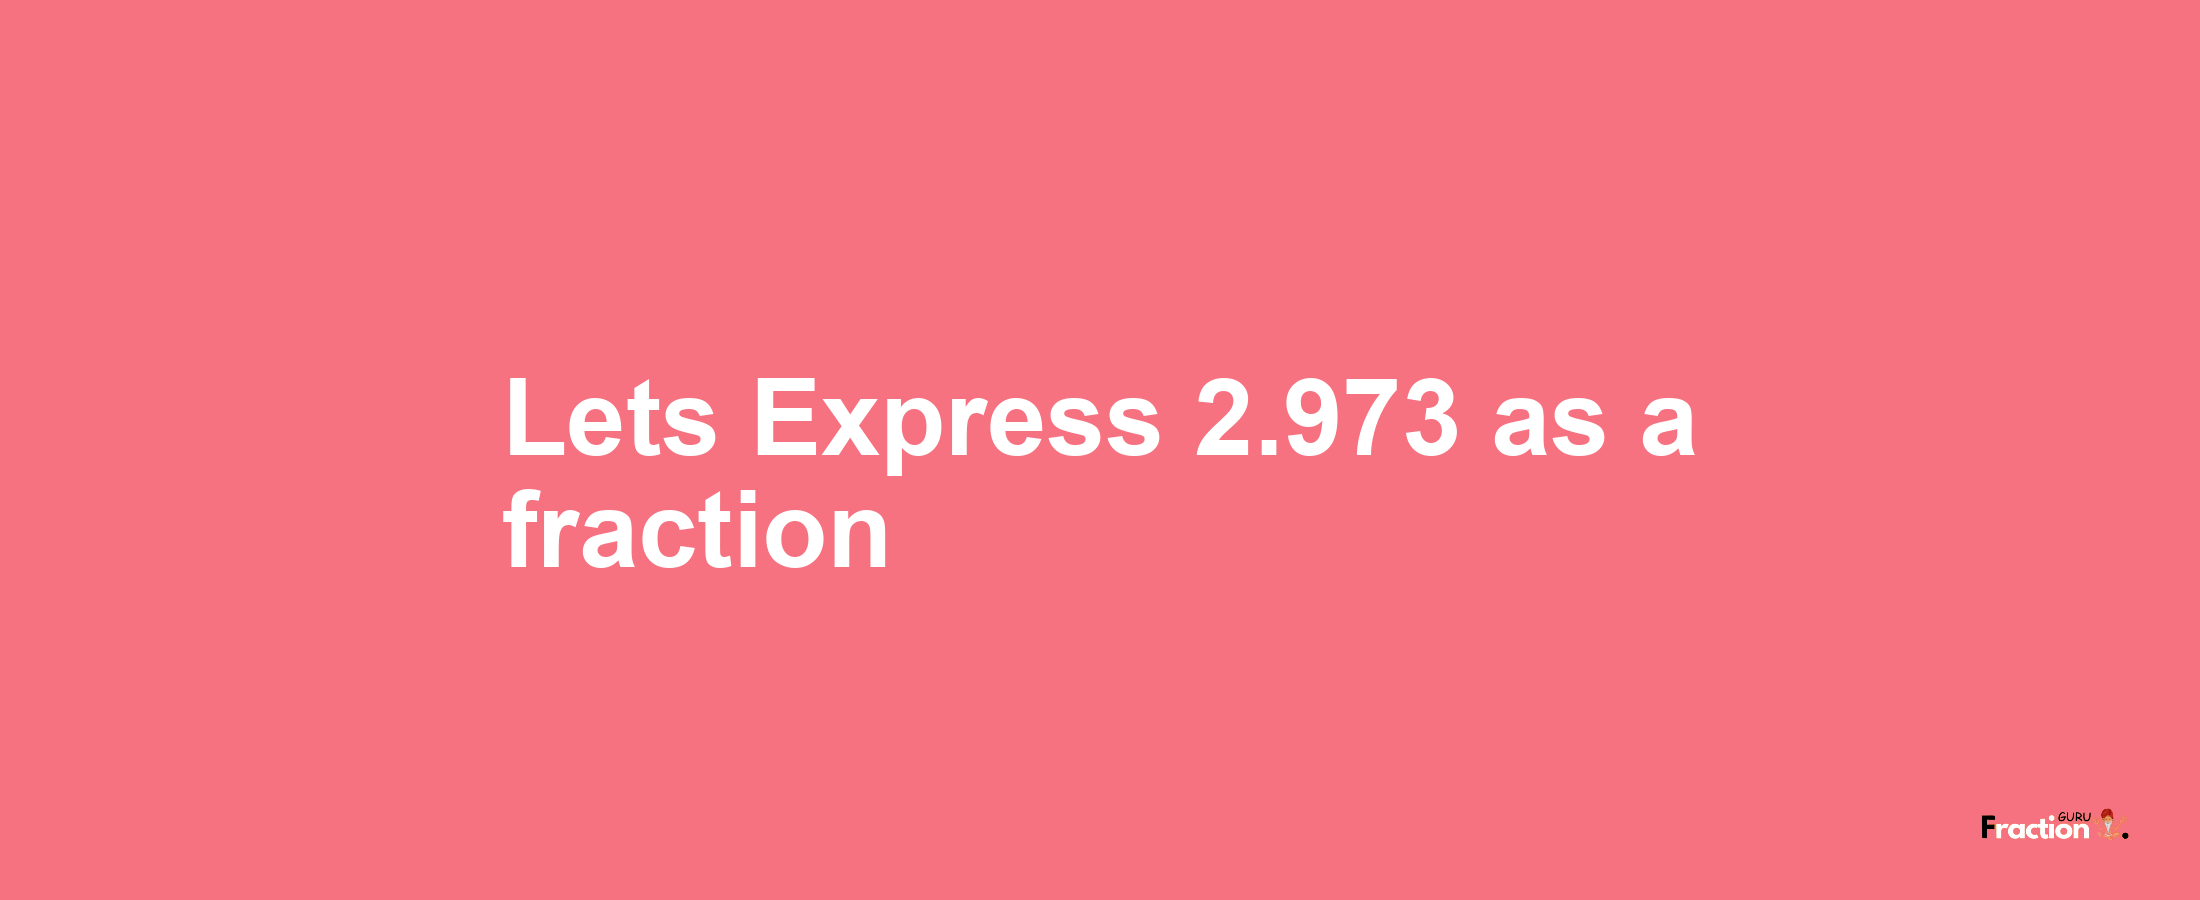 Lets Express 2.973 as afraction